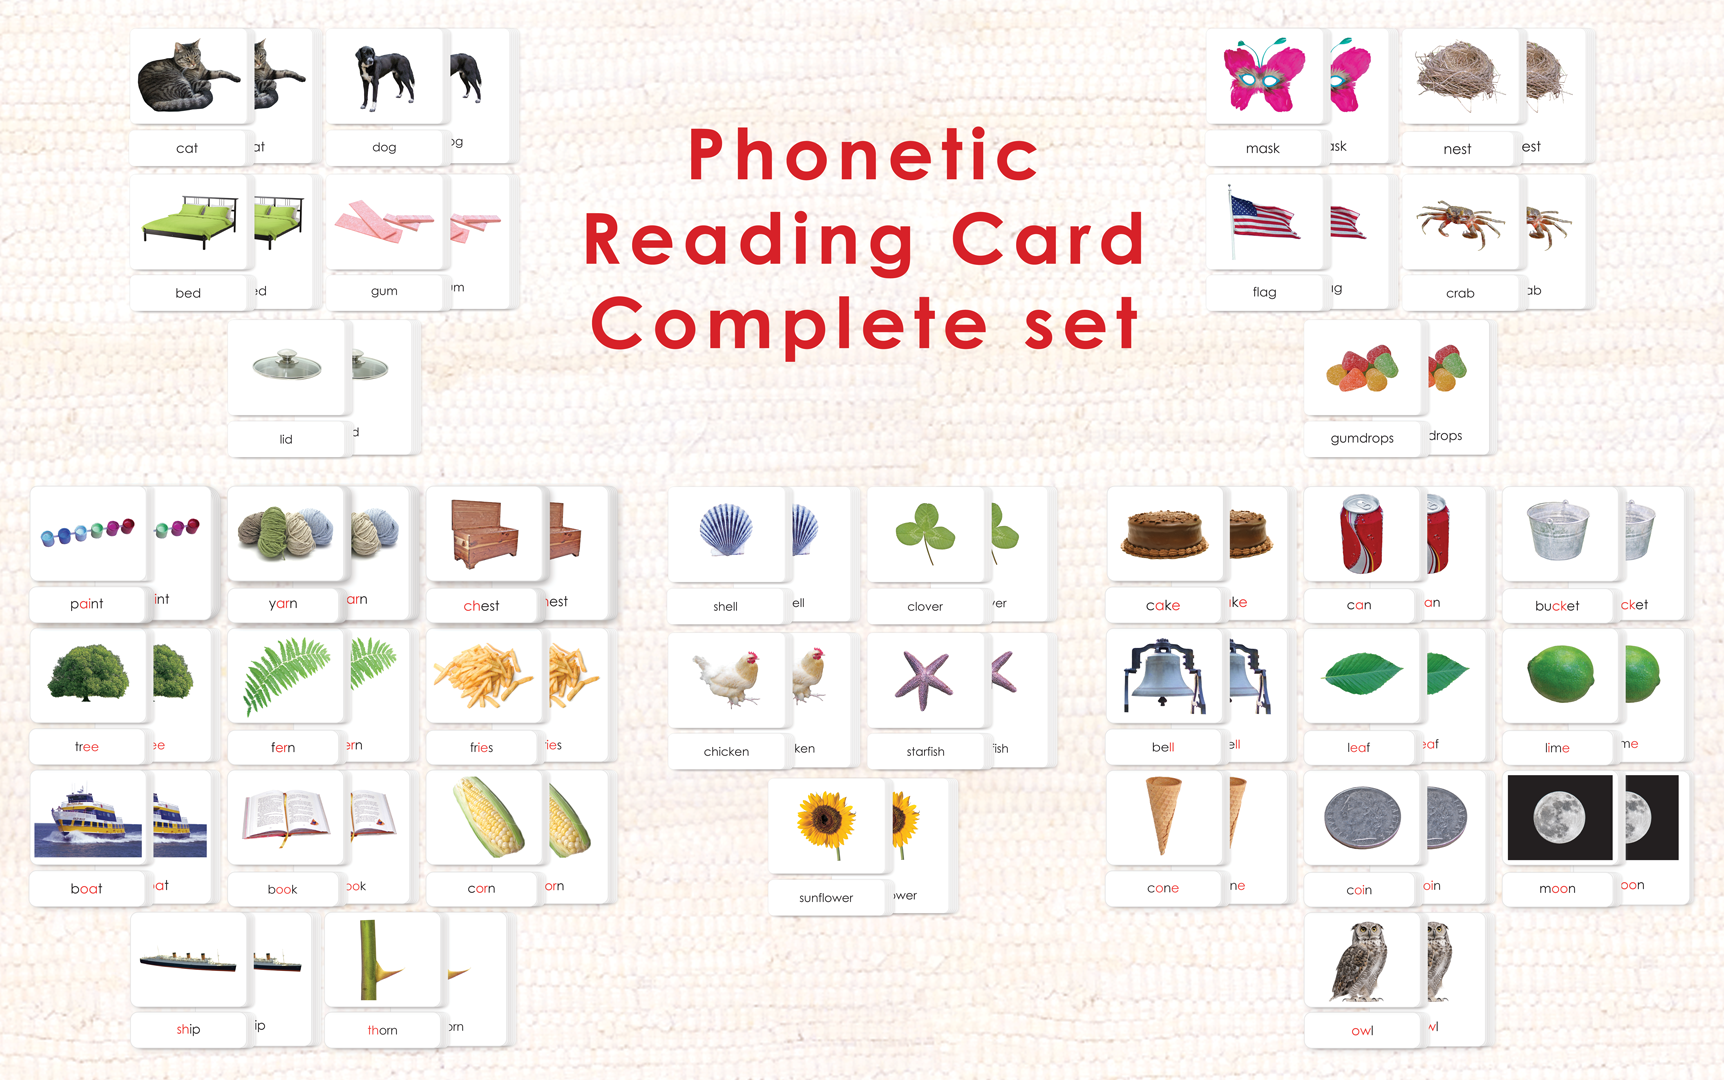 Imperfect Phonetic Reading Card Set (Complete)